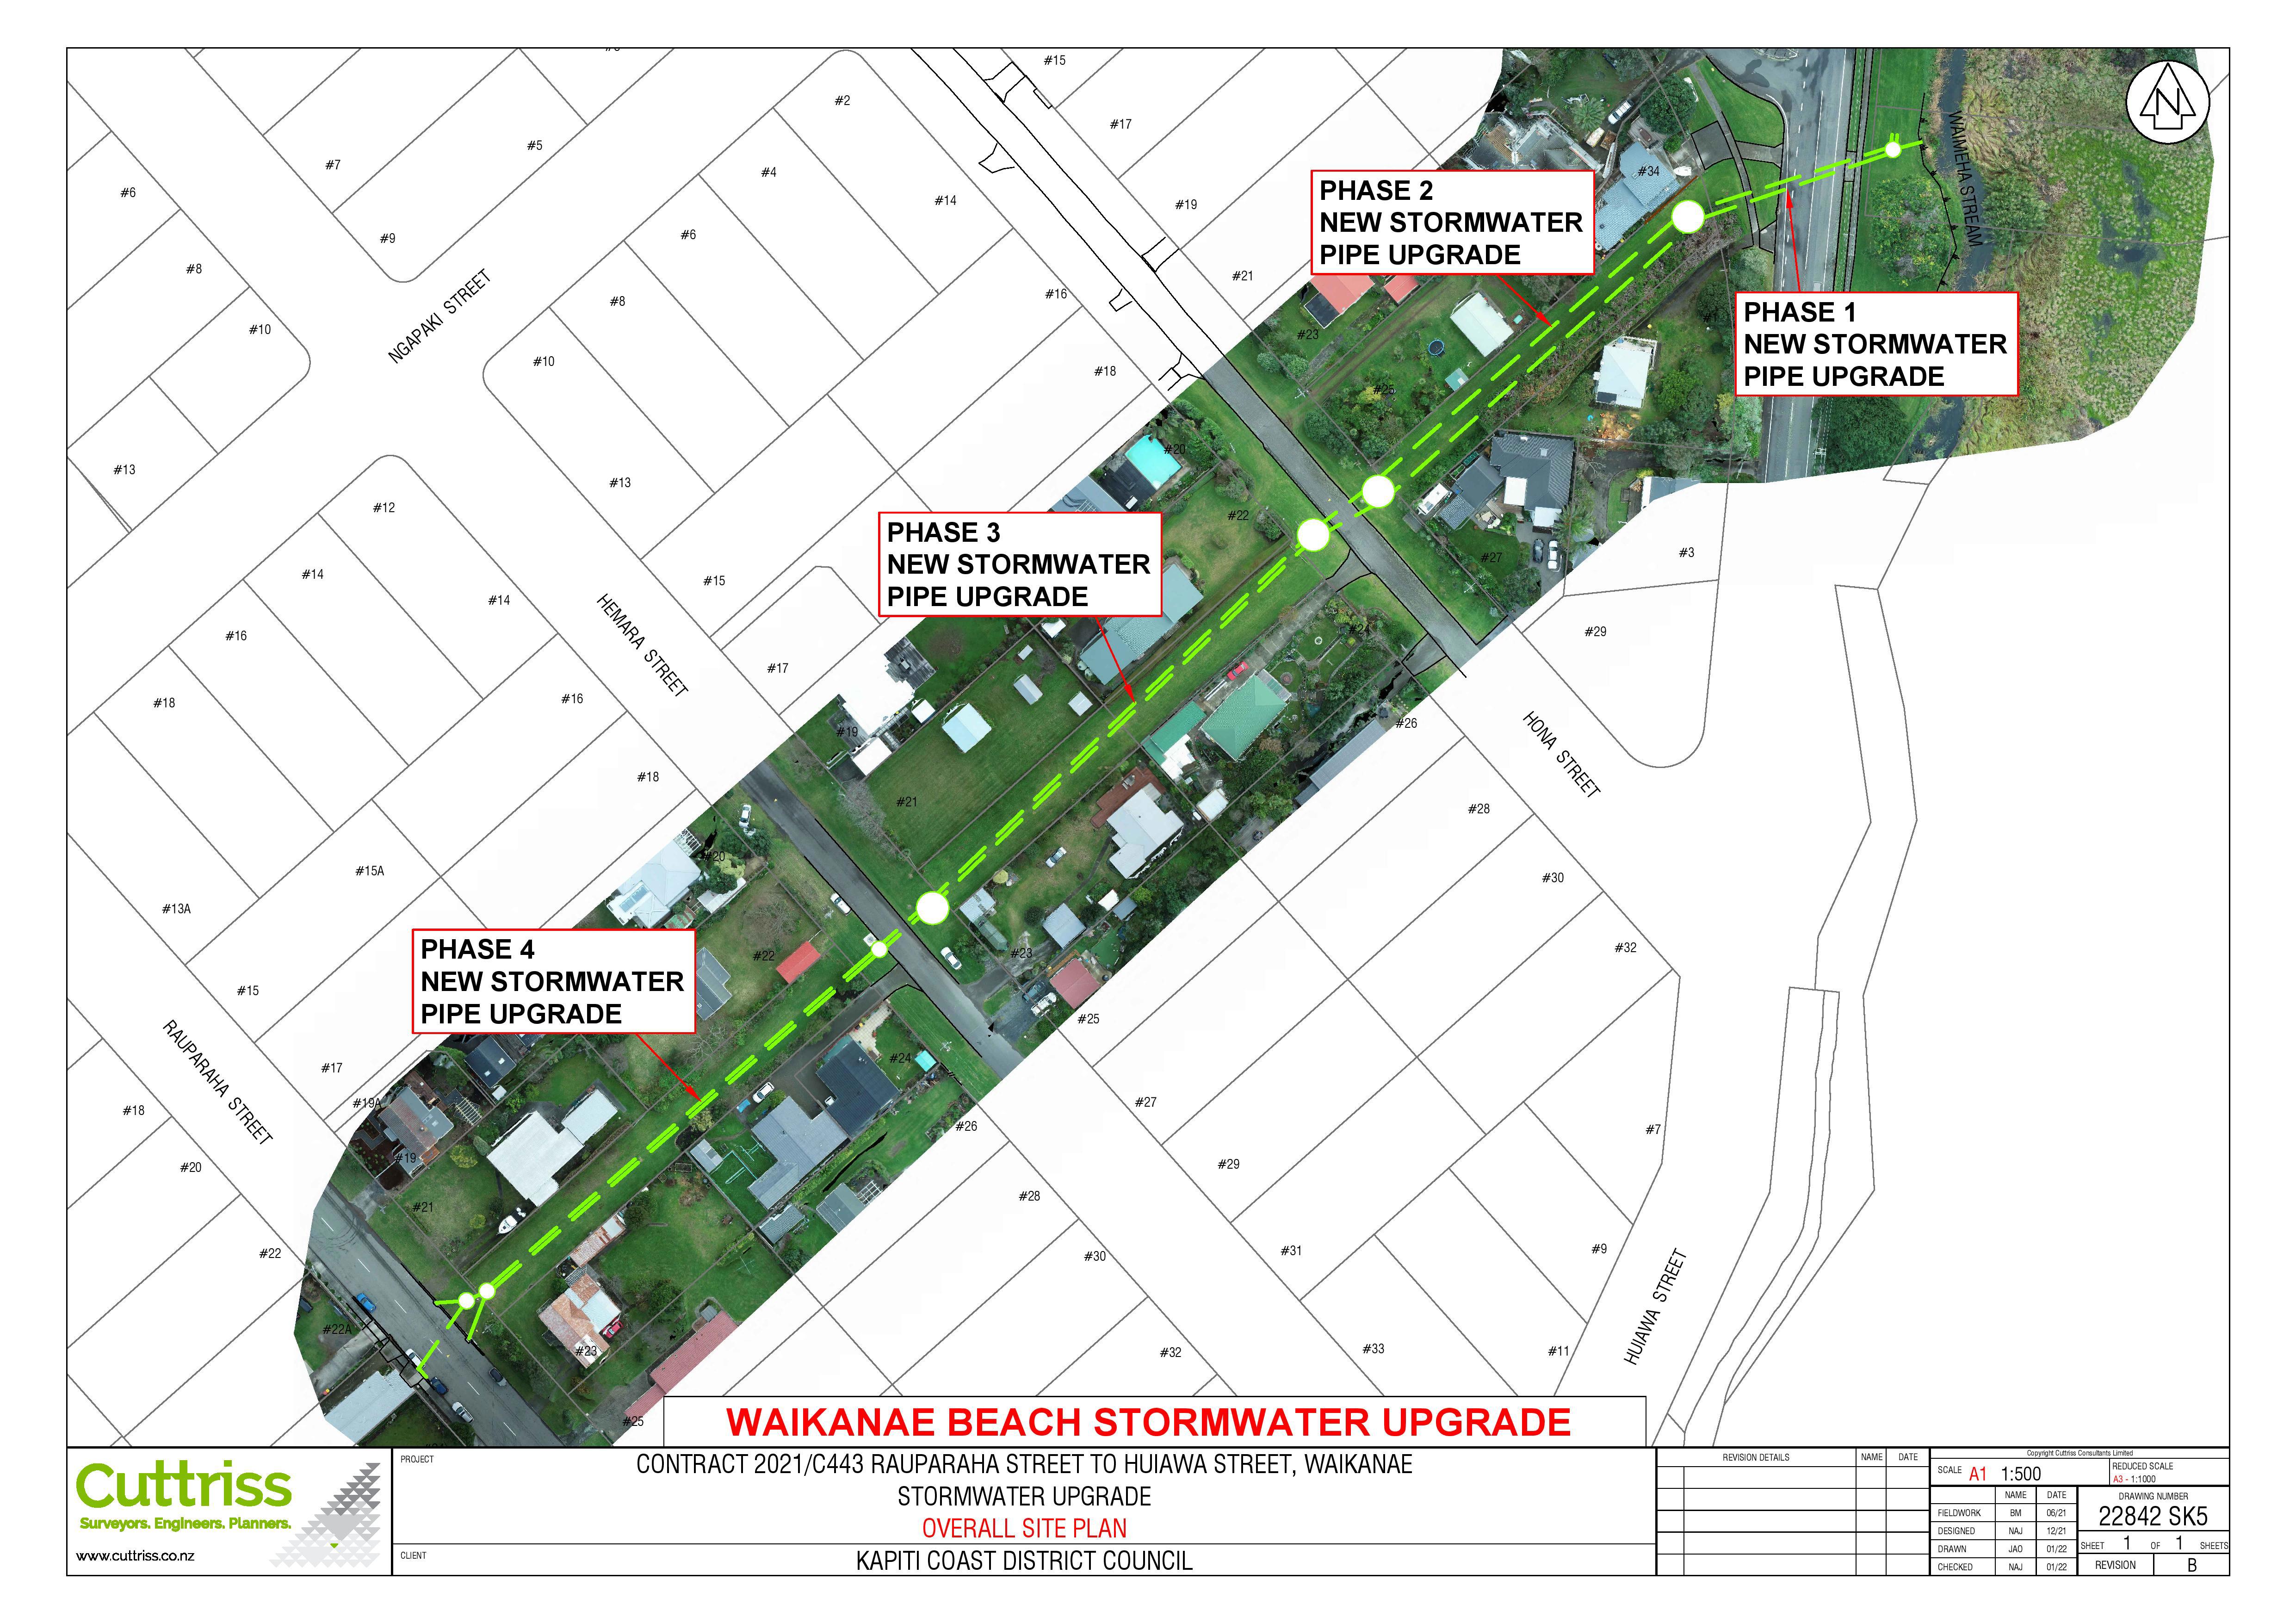 Map of Waikanae Beach stormwater upgrade work area and stages.